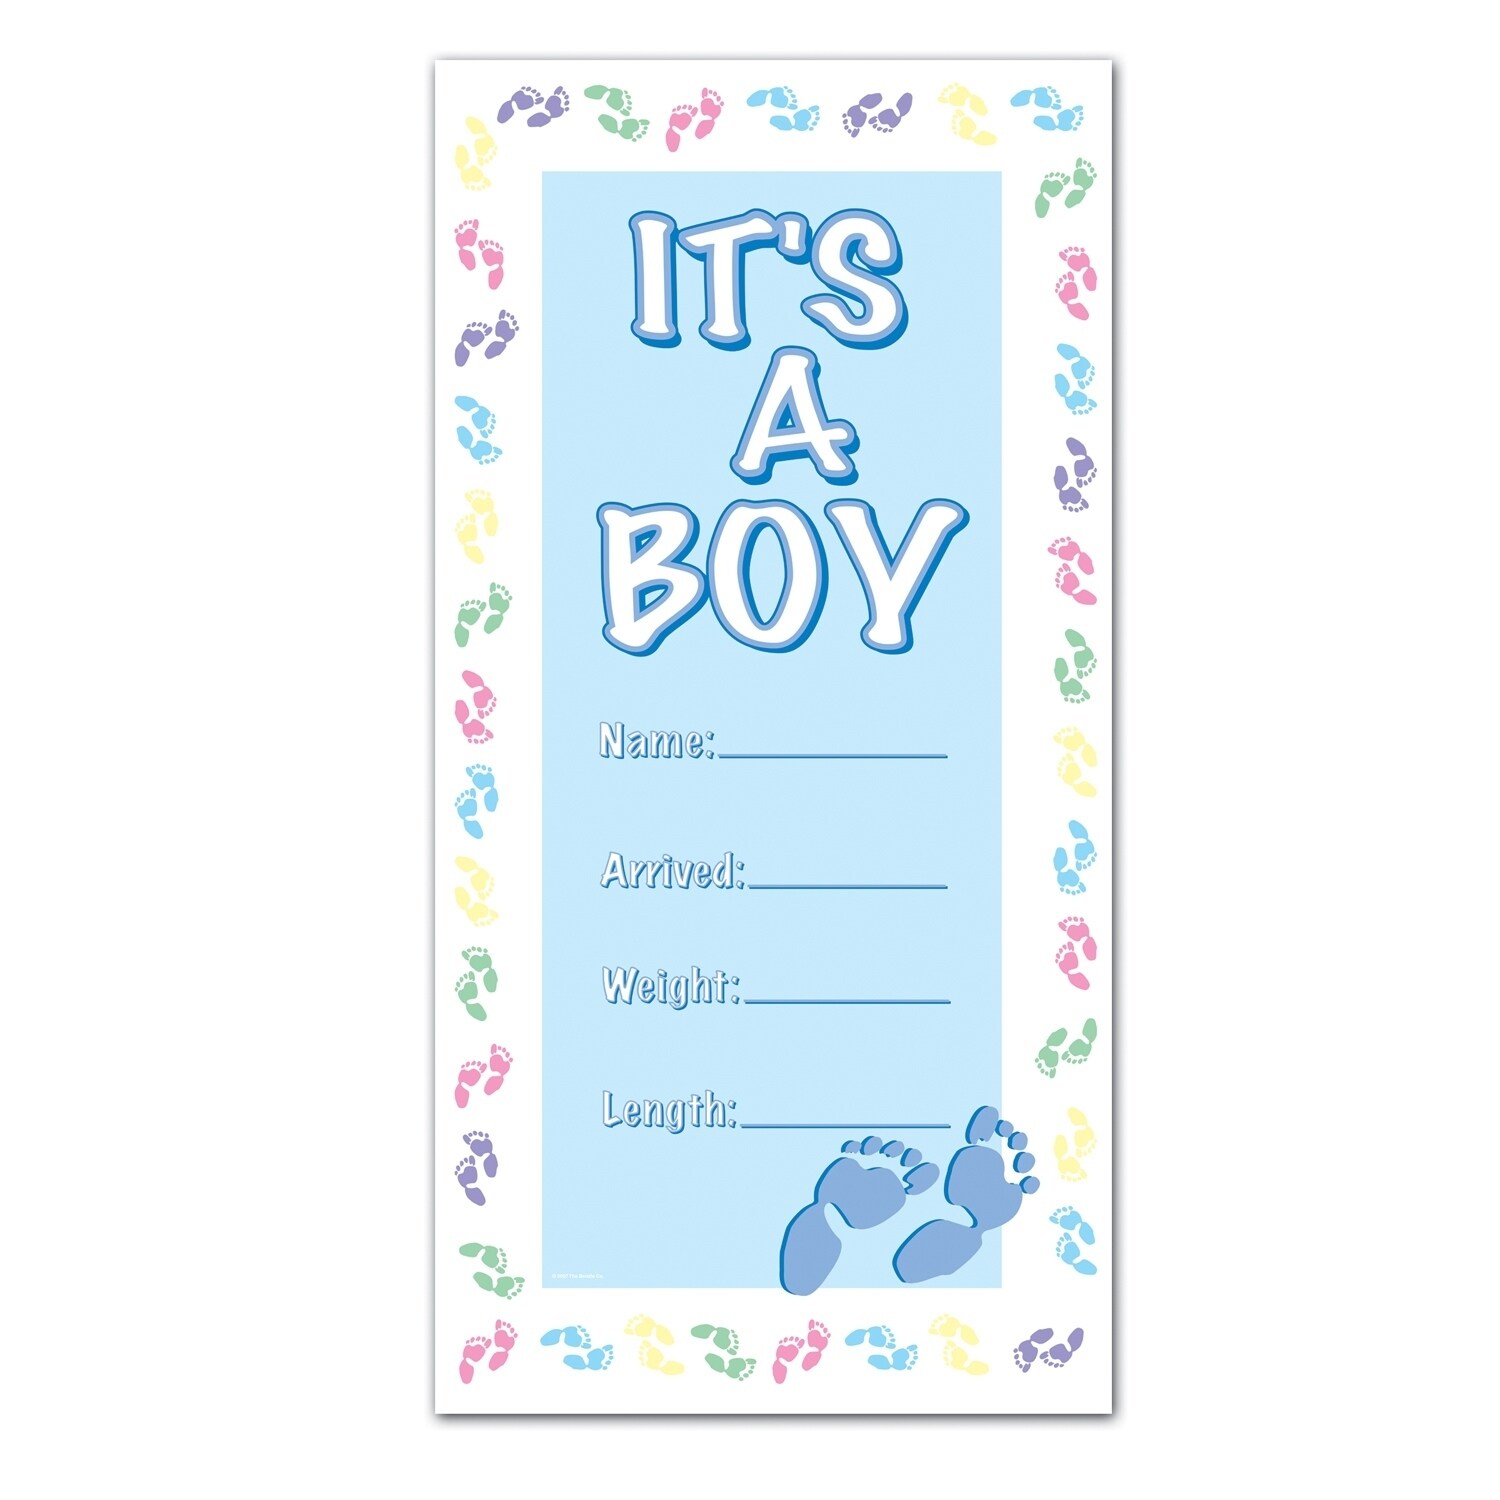 30+1 Baby Shower Ideas for Boys